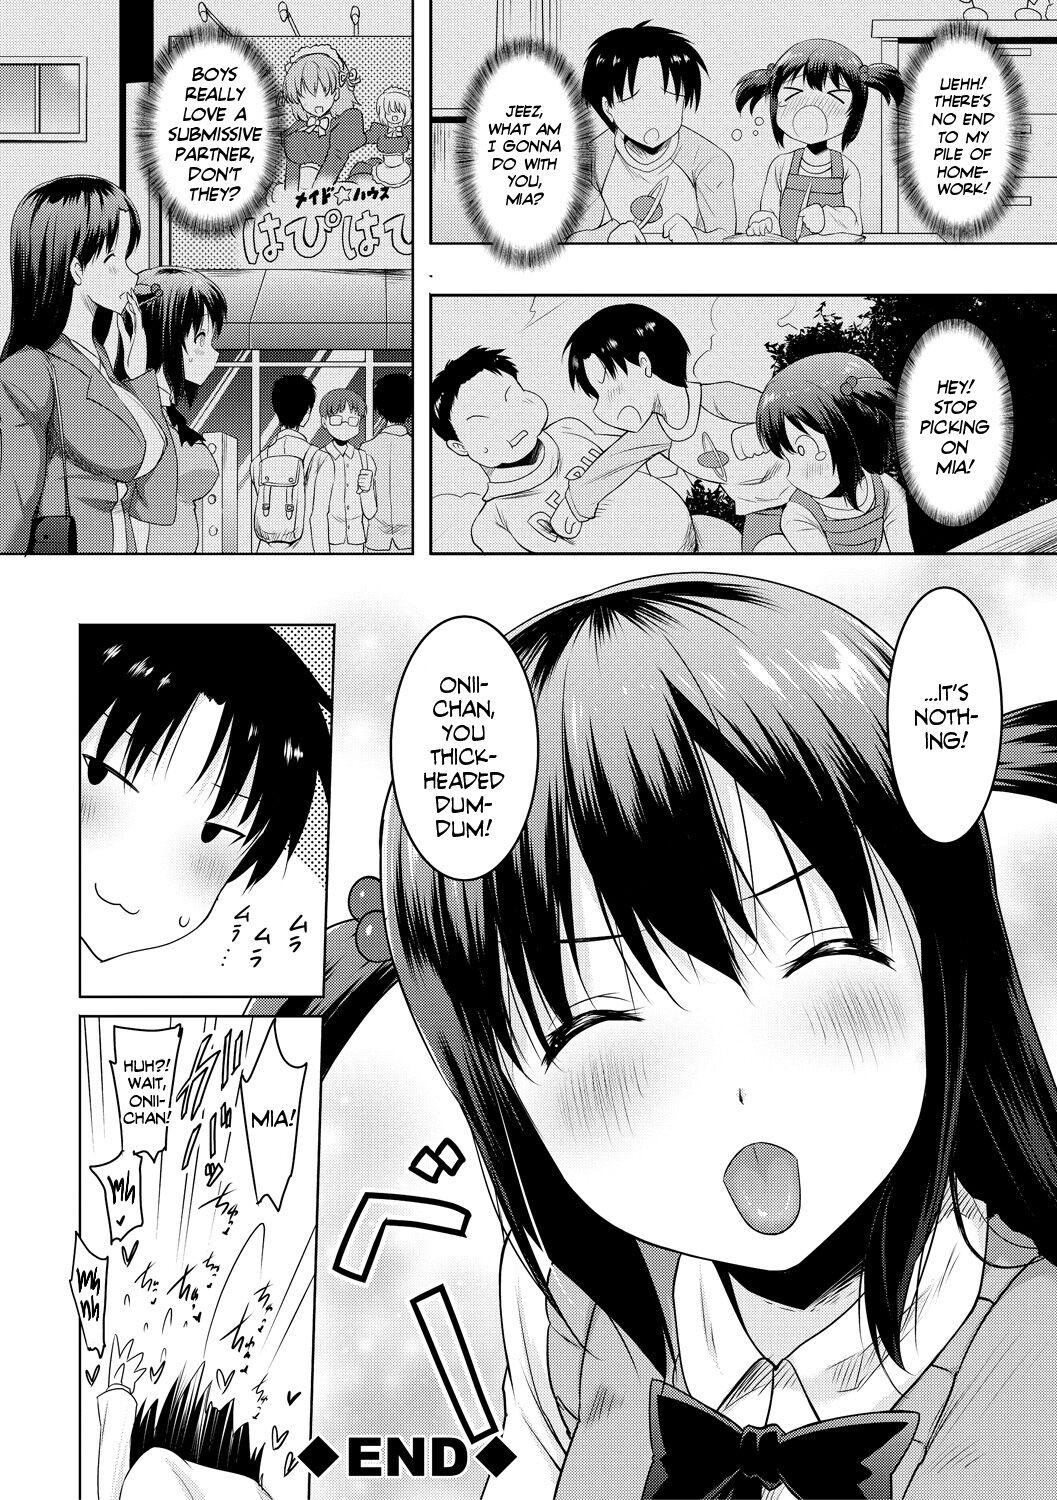 [Pony-R] I Can't Live Without My Little Sister's Tongue Chapter 01-02 + Secret Baby-making Sex with a Big-titted Mother and Daughter! (Kyonyuu Oyako no Shita to Shikyuu ni Renzoku Shasei) [English] [Team Rabu2] [Digital] 40